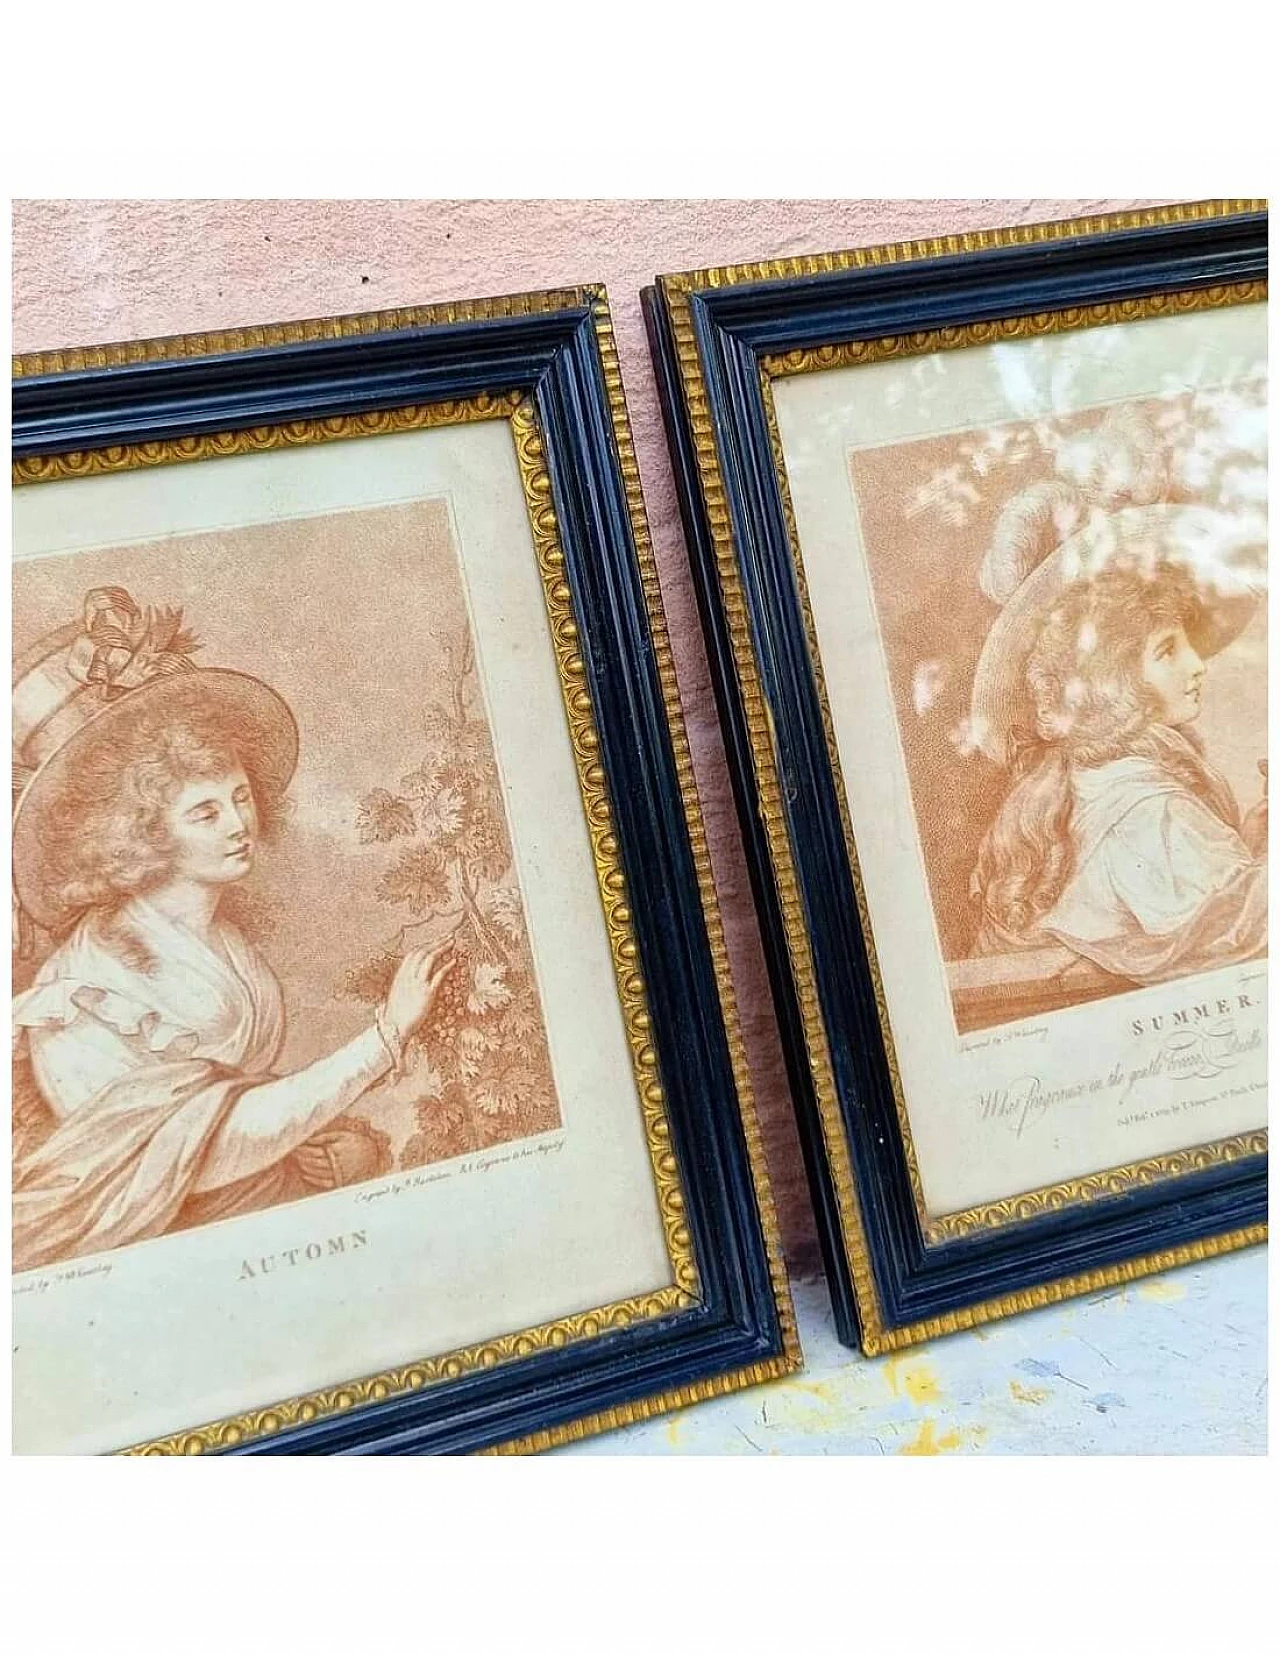 Pair of Automn and Summer sanguine etchings by Francesco Bartolozzi, 1780 3